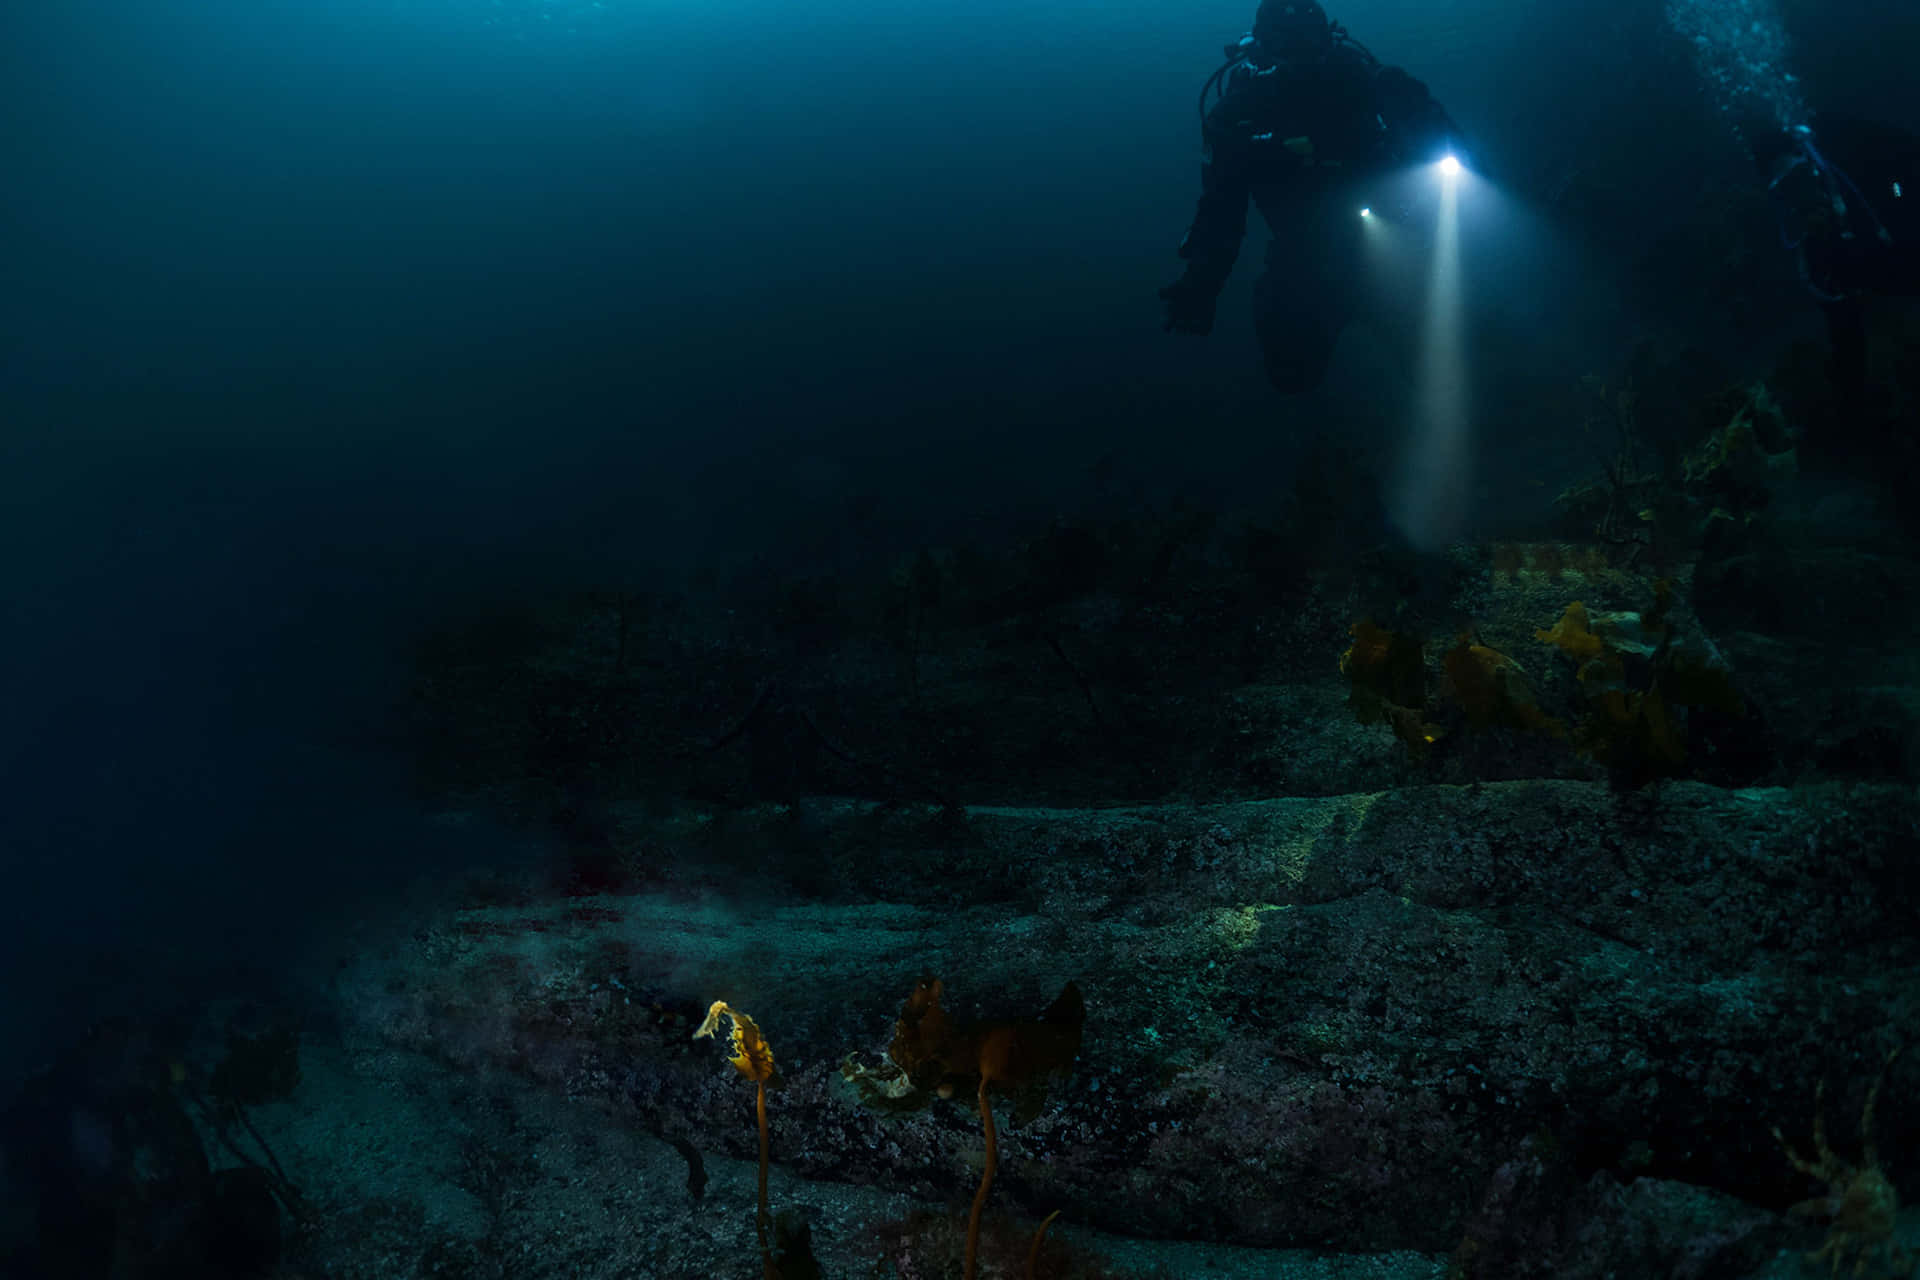 Explore the depths of the unknown with a journey through a scary underwater world.